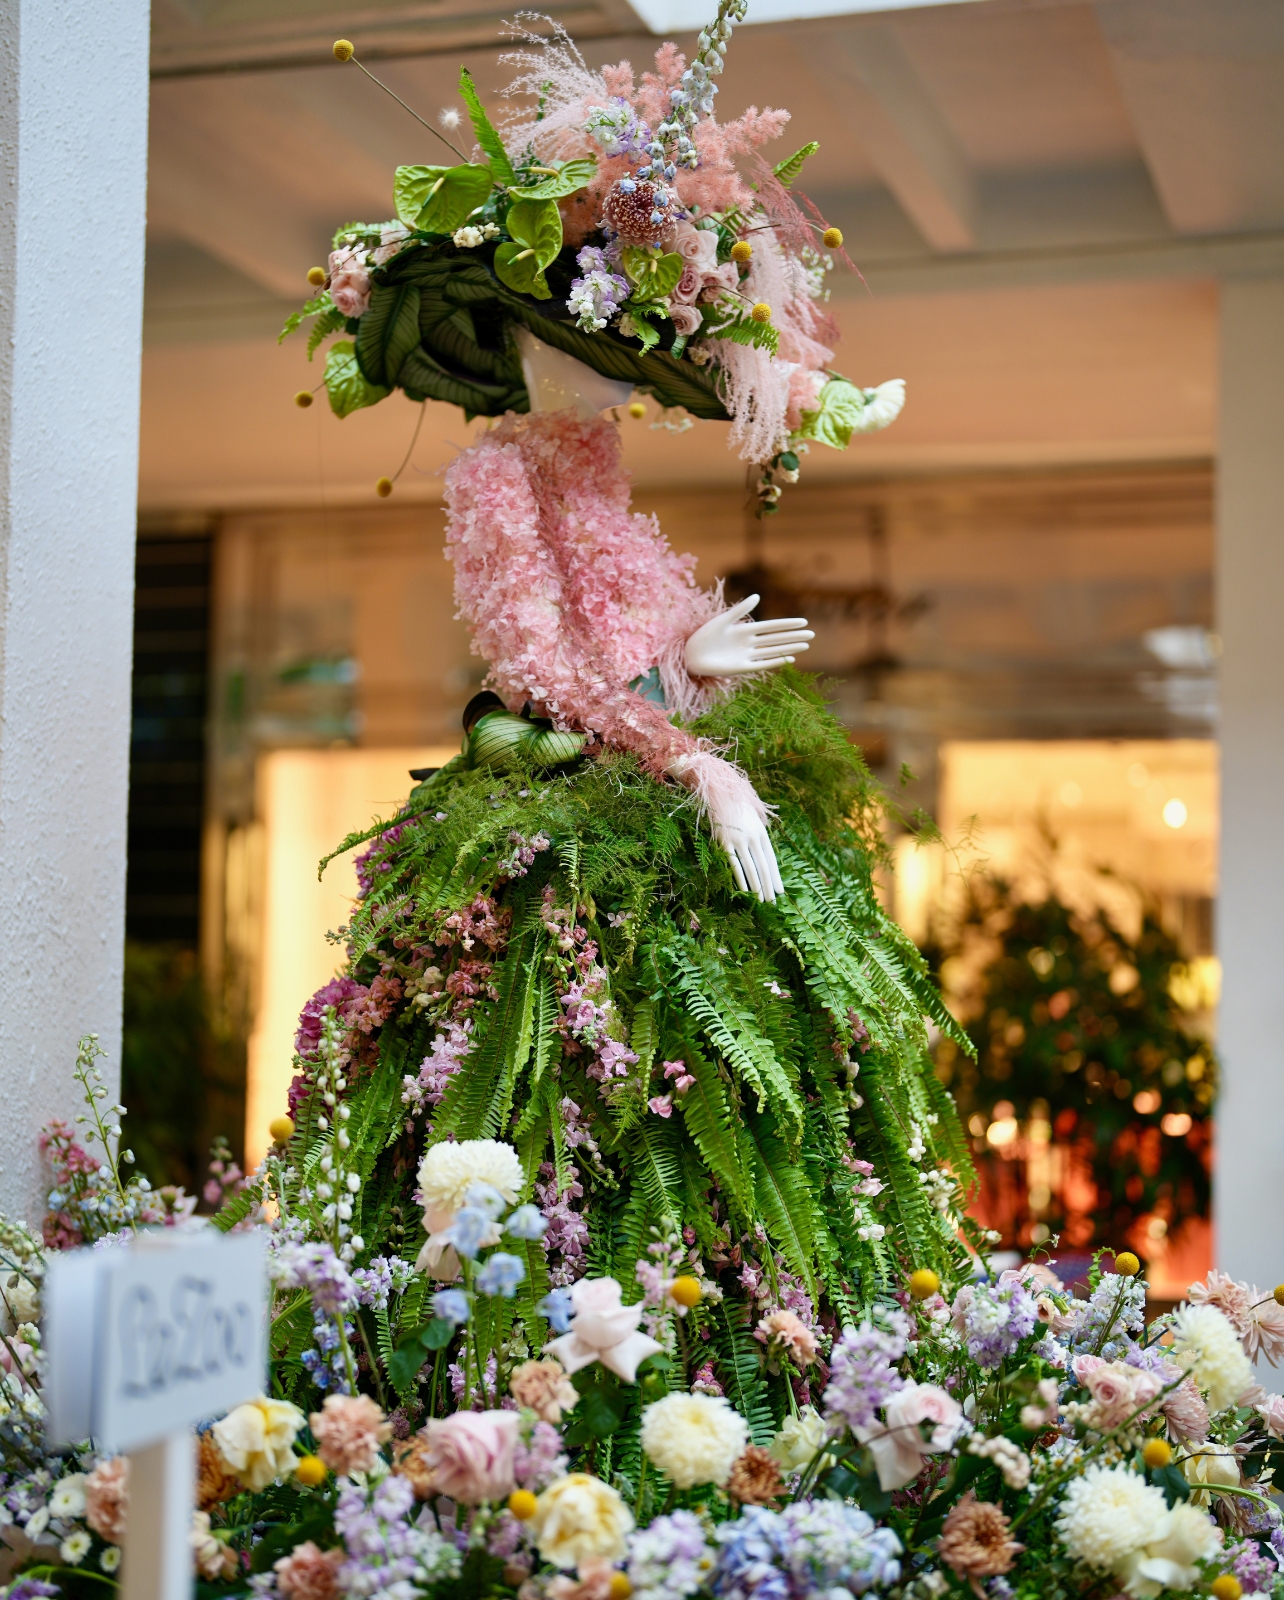 Floral mannequin inspired by Audrey Hepburn’s role in My Fair Lady at Bal Harbour Shops